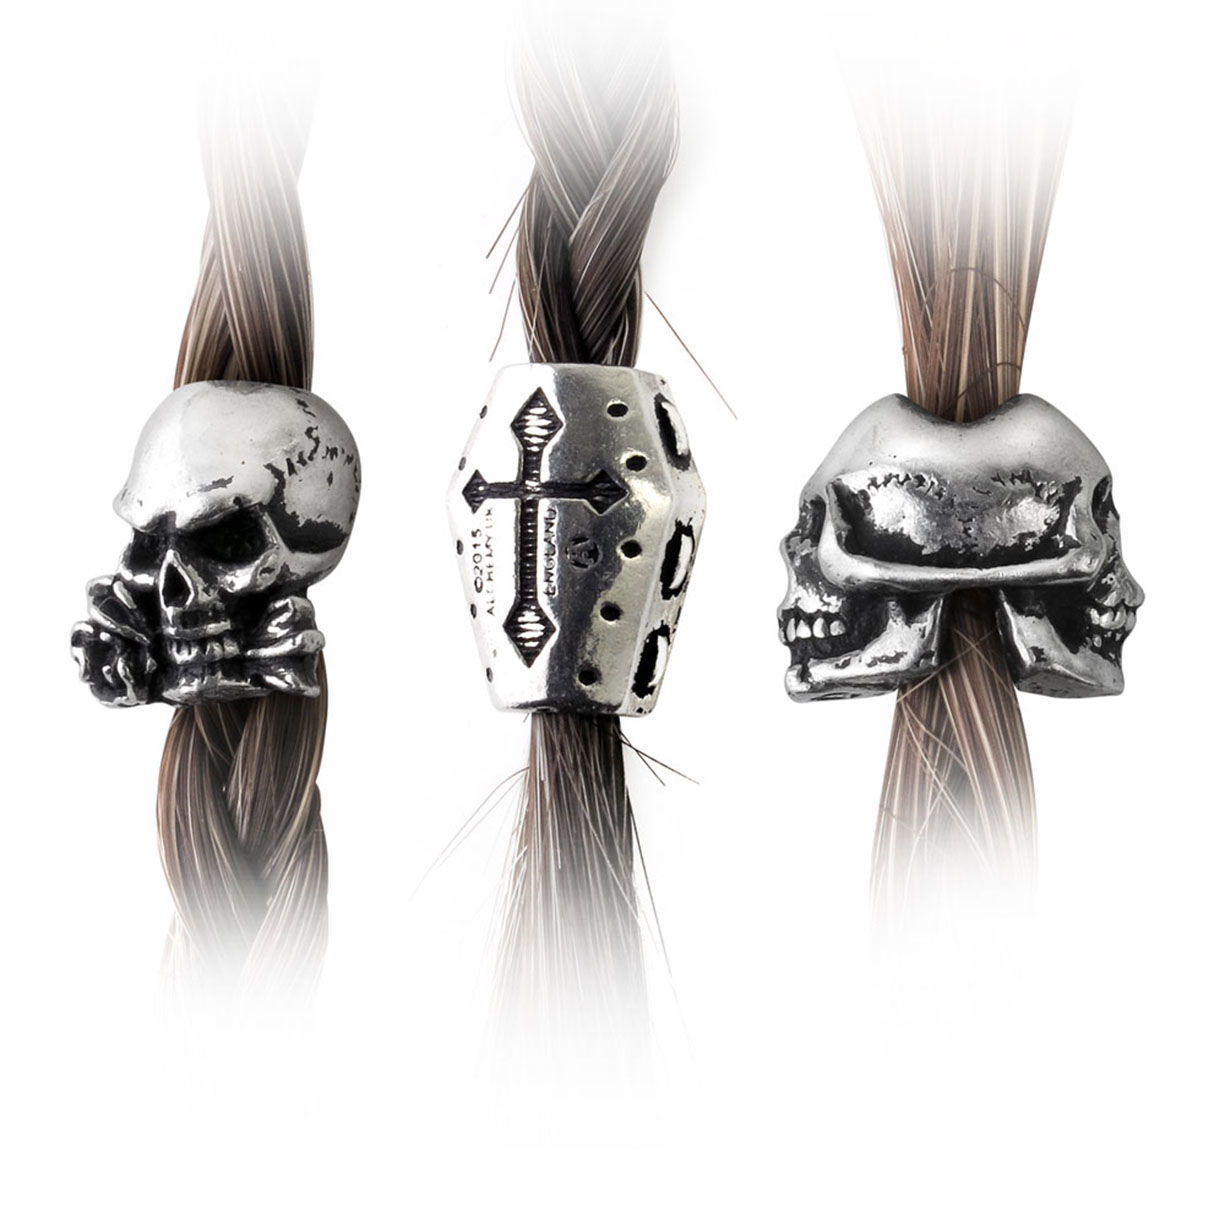 pewter beard beads include a Janus Skull, Alchemist's Skull, and a Coffin, thread them into your beard or hair